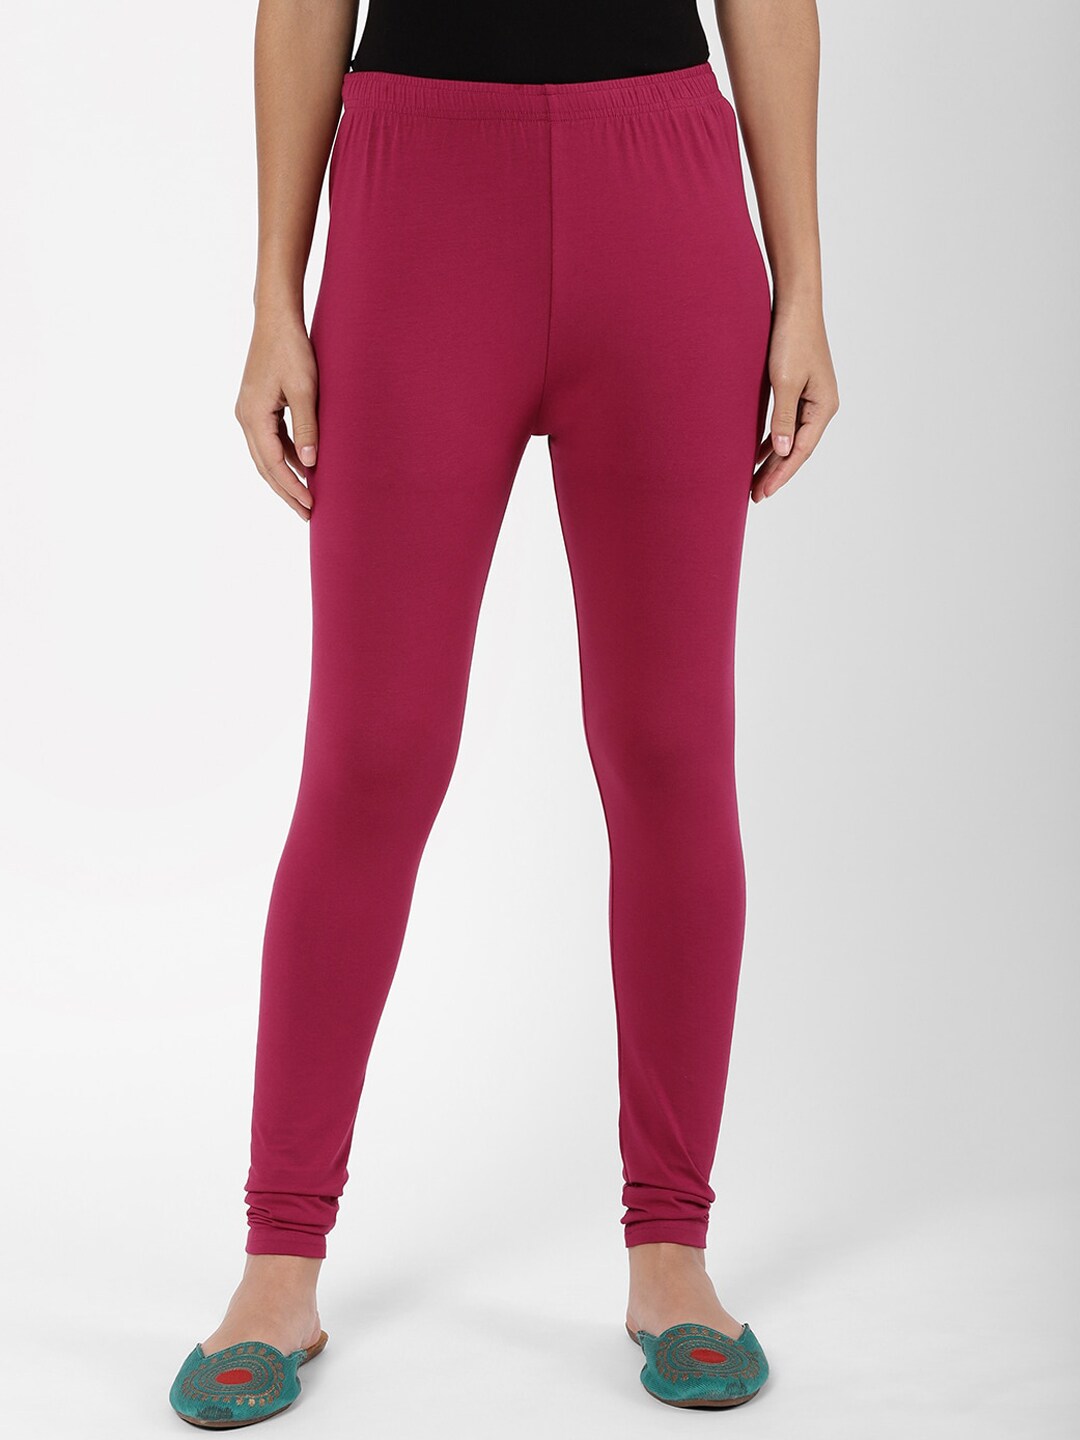 R&B Women Red Solid Ankle-Length Legging Price in India